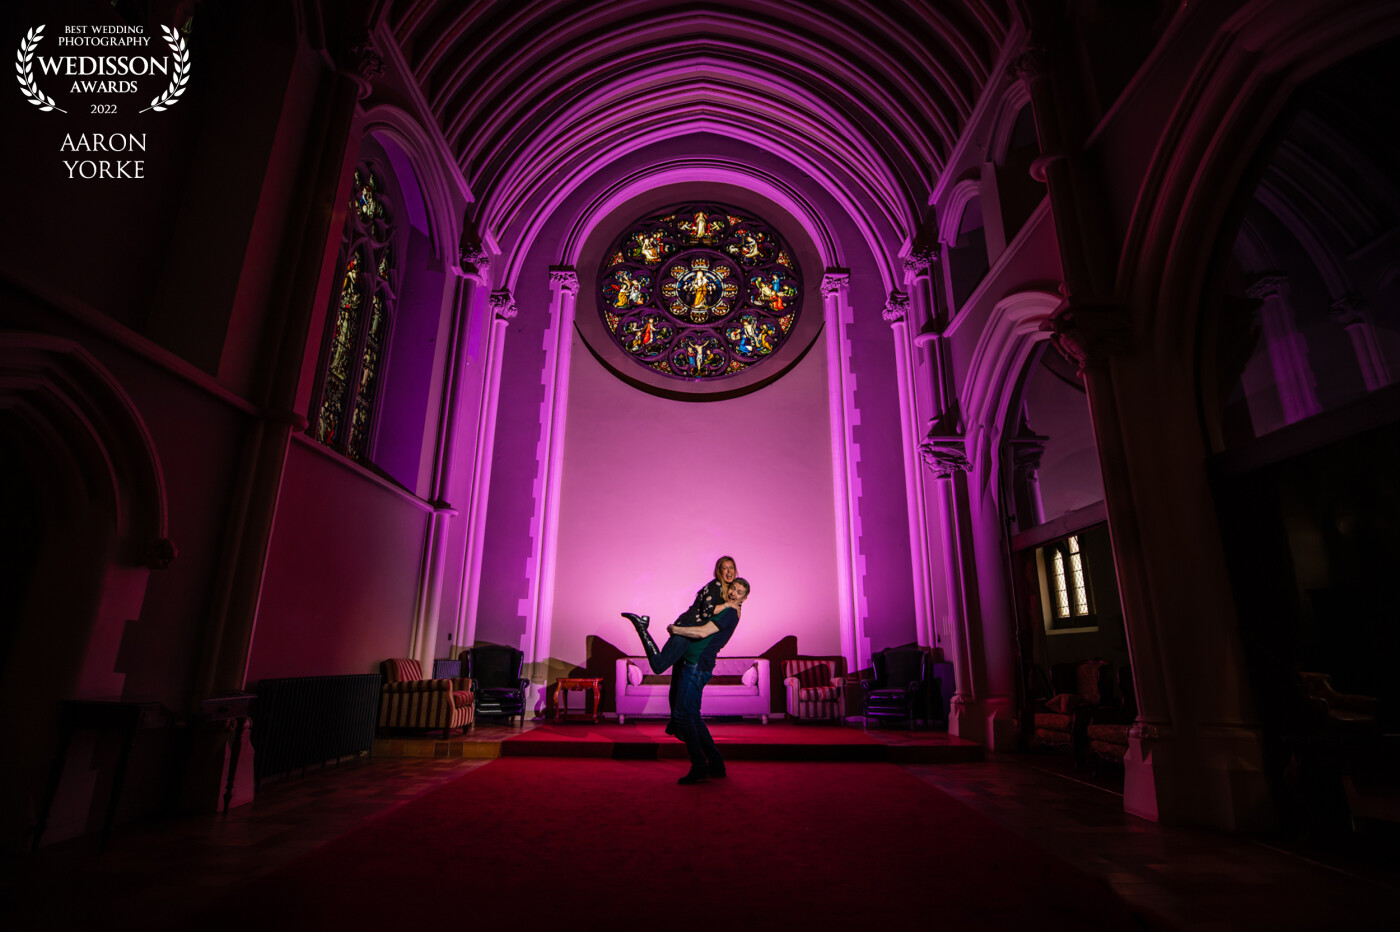 I took this shot at the beautiful Stanbrook Abbey in Worcestershire. It was an engagement shoot for a couple getting married there. I wanted to light the back wall up with a purple/pink colour so to do this I placed a bare flash full power with a gel facing the wall. I then placed a grid on a front flash from the side and lit the couple. The rest was all down to Paul (the groom) to do the lovers lift and to hold Angela (the bride) in position to get the shot! So much fun to take!